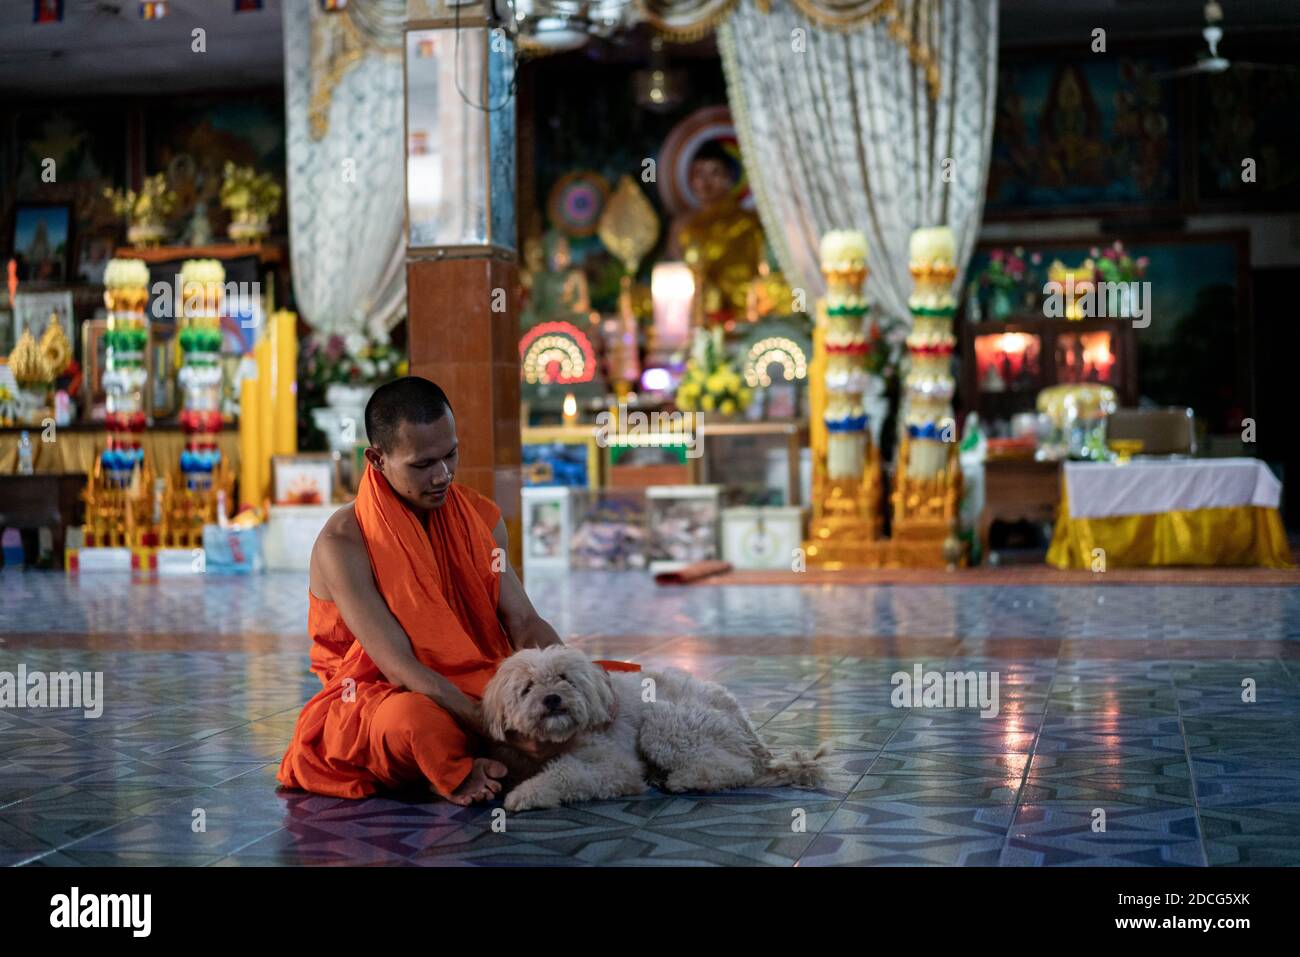 Svay Rieng, Cambodia. 18th July, 2020. A monk pets his dog at a pagoda.An estimated 800 people a year die of rabies in Cambodia, one of the highest deaths rates per capita in the world. At the root of Cambodia's endemic are unvaccinated dogs, in a country with one of the highest dog to human ratios in the world. Efforts at achieving herd immunity are significantly disrupted by the 3 million dogs per year slaughtered for Cambodia's dog meat trade. Some experts have warned that unless the dog meat trade is addressed, rabies will still remain prevalent. (Credit Image: © Andy Ball/SOPA Images v Stock Photo